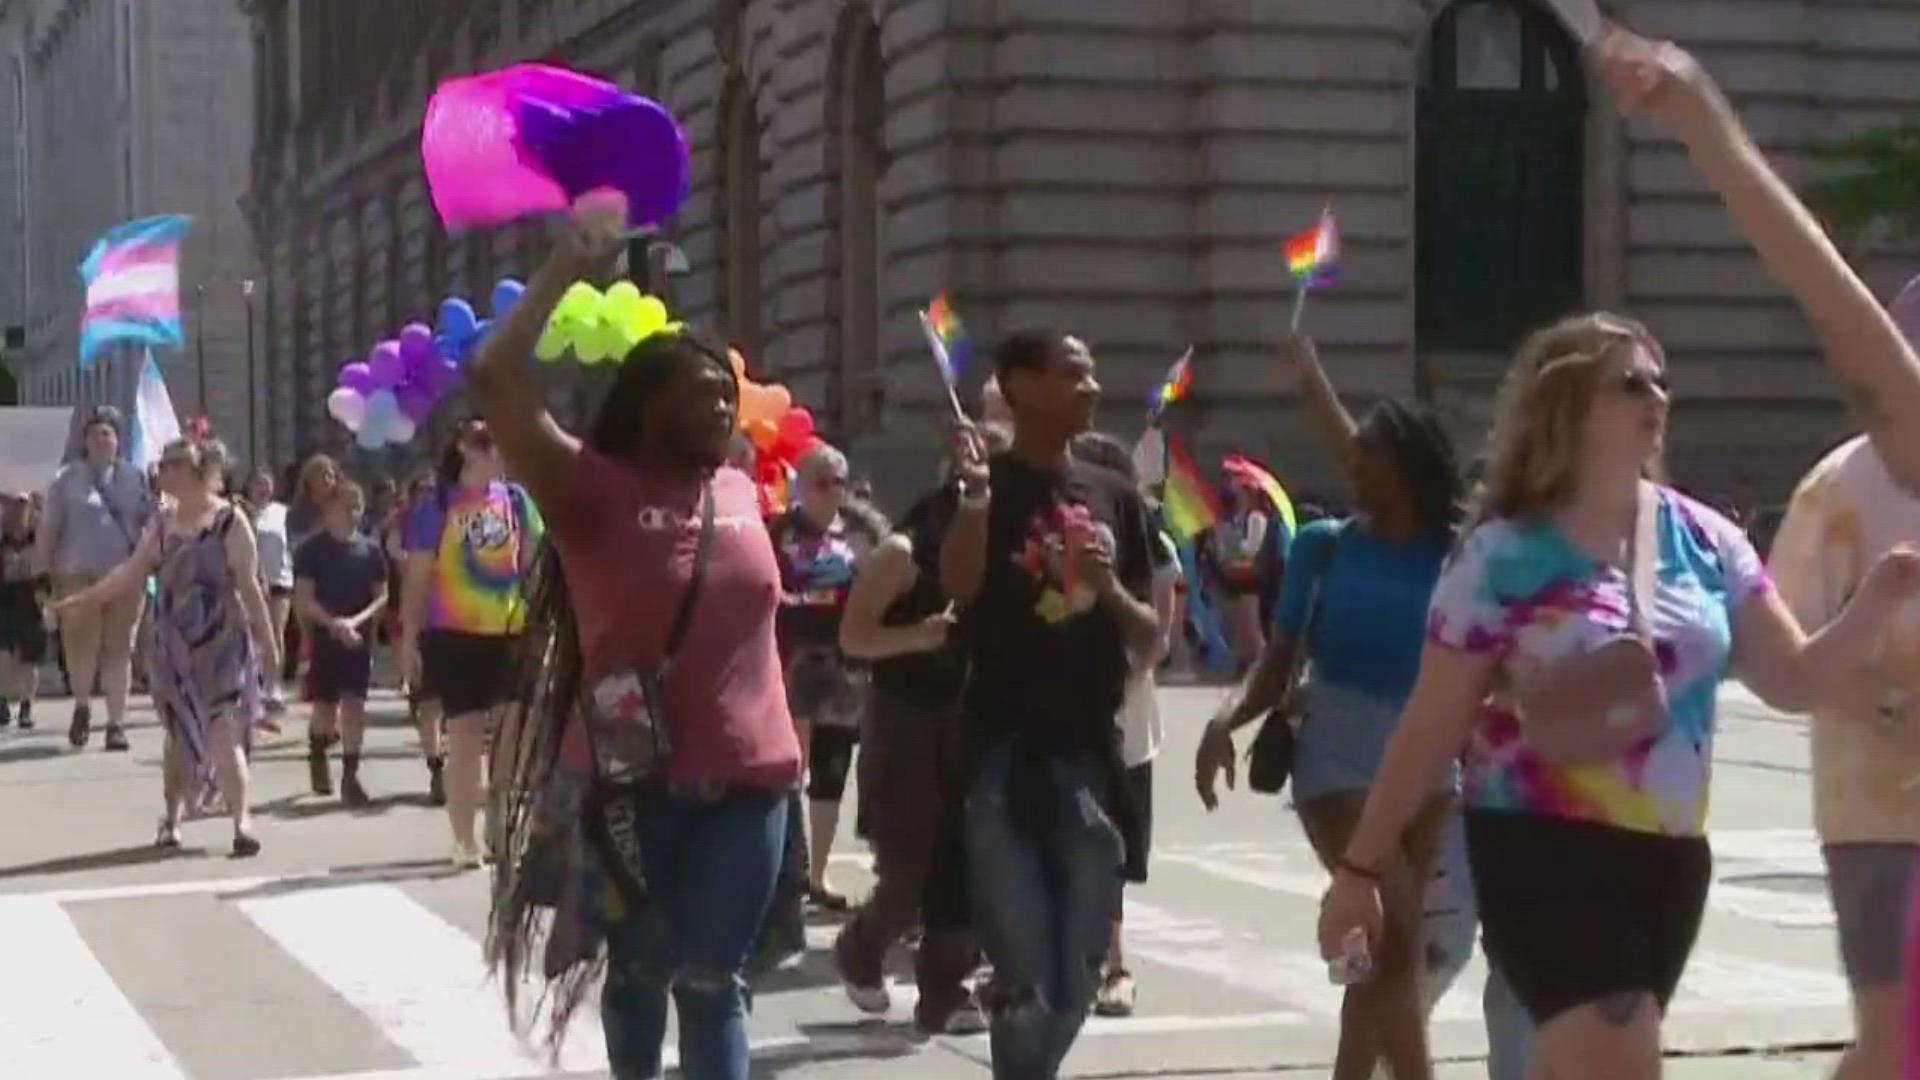 Here are moments from the Pride in the CLE march that was held Saturday morning in downtown Cleveland.